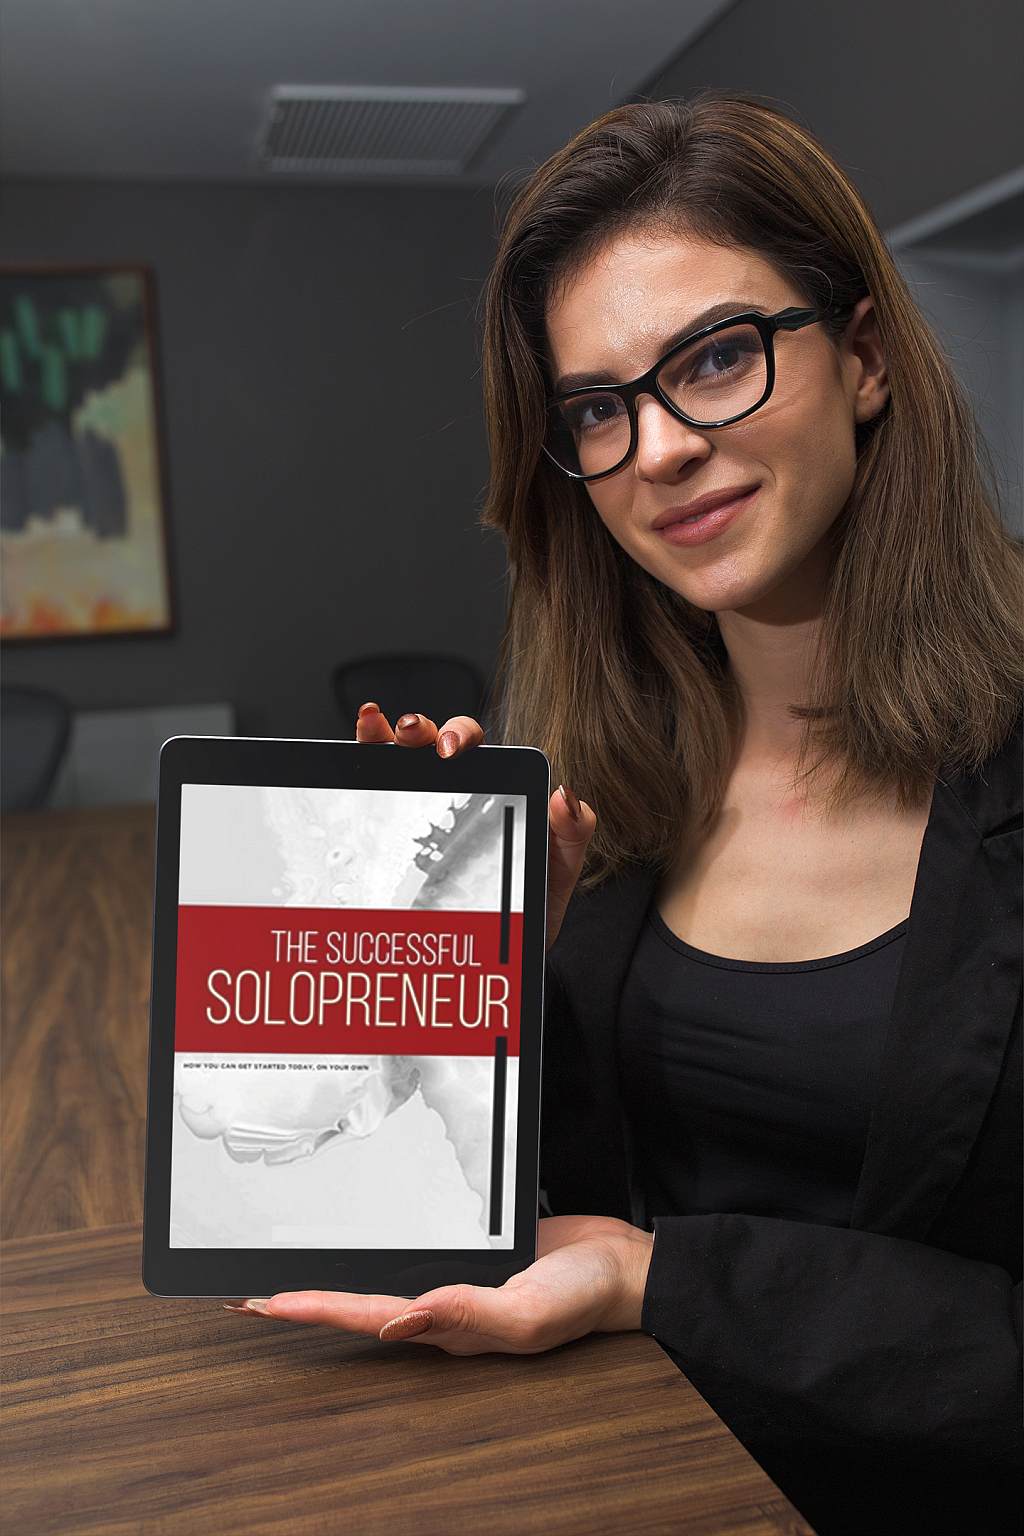 The Successful Solopreneur: How to Make it On Your Own